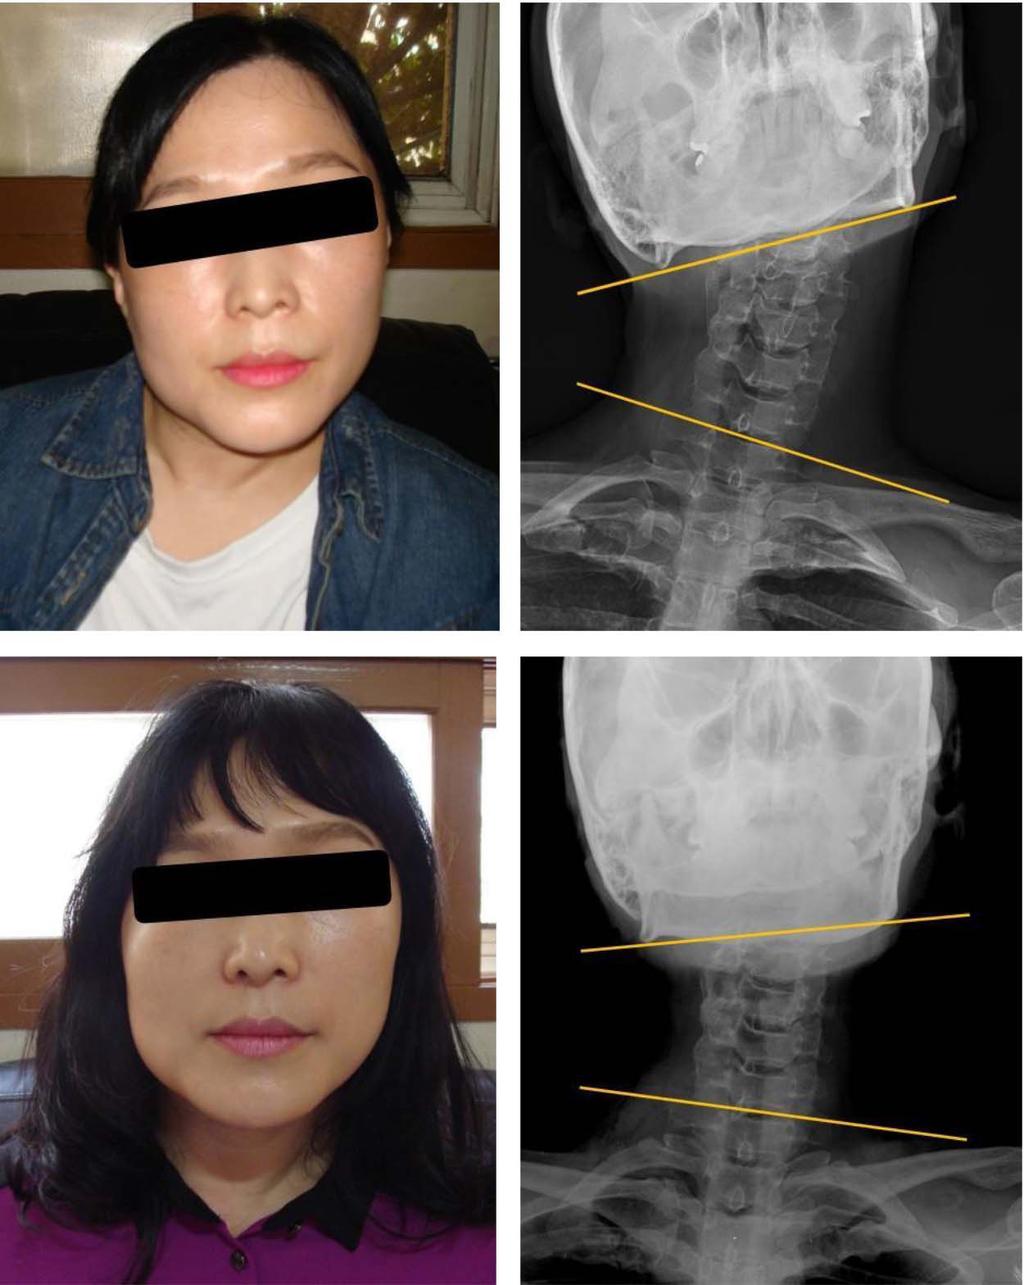 J Korean Neurosurg Soc 60 January 2017 patient's neck was extended with a sandbag, and then the patient's head was turned toward the shoulder on the opposite, uninvolved side.